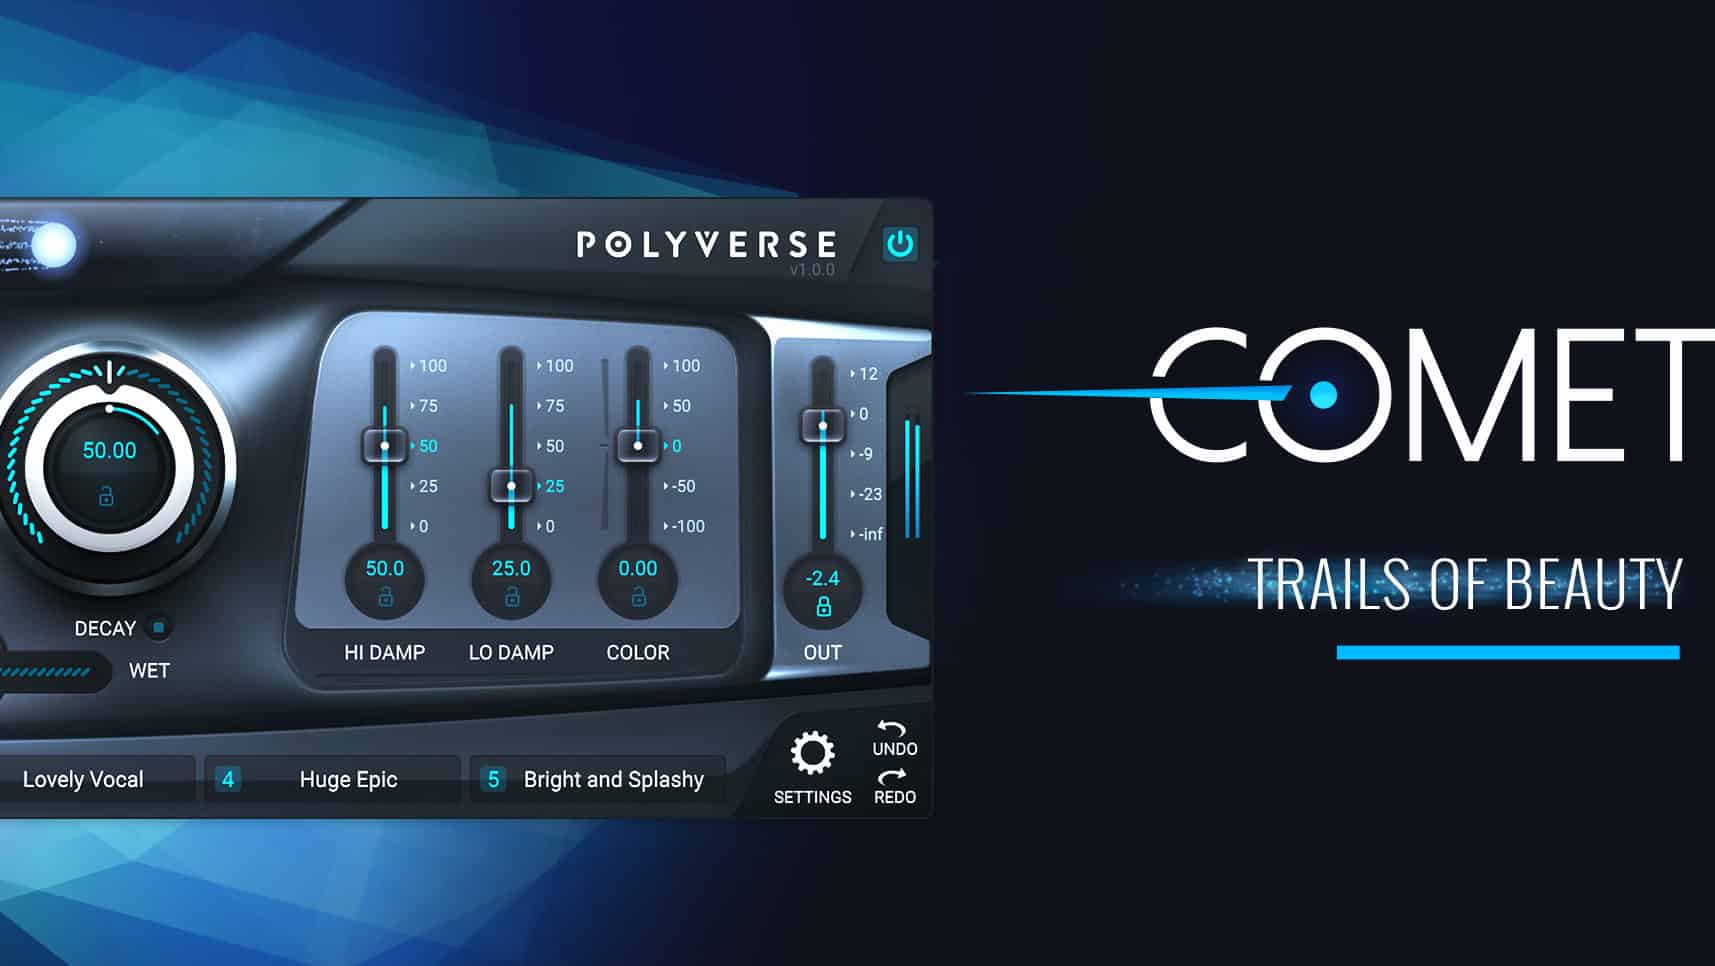 Comet V1.0 by Polyverse Music Official Release